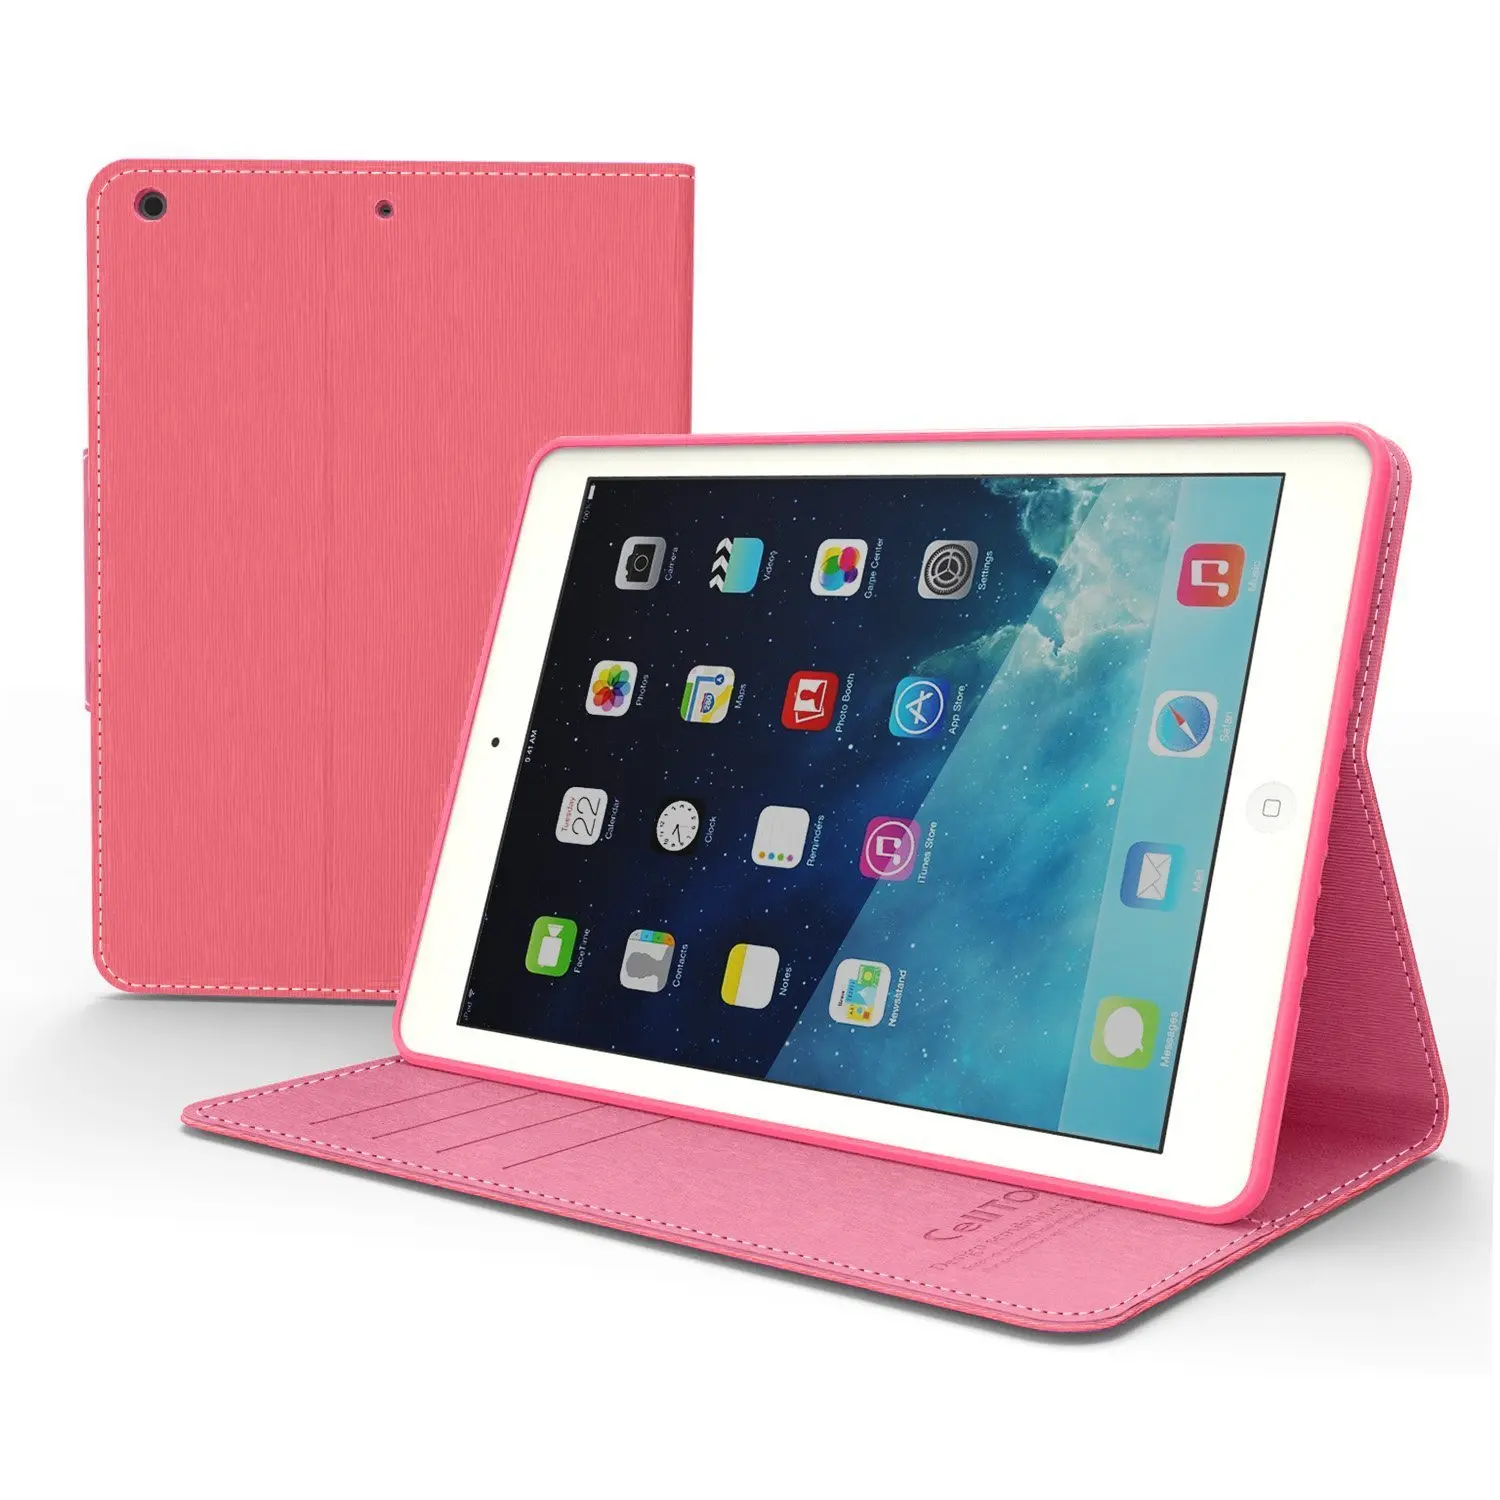 Cheap Pink Ipad 4, find Pink Ipad 4 deals on line at